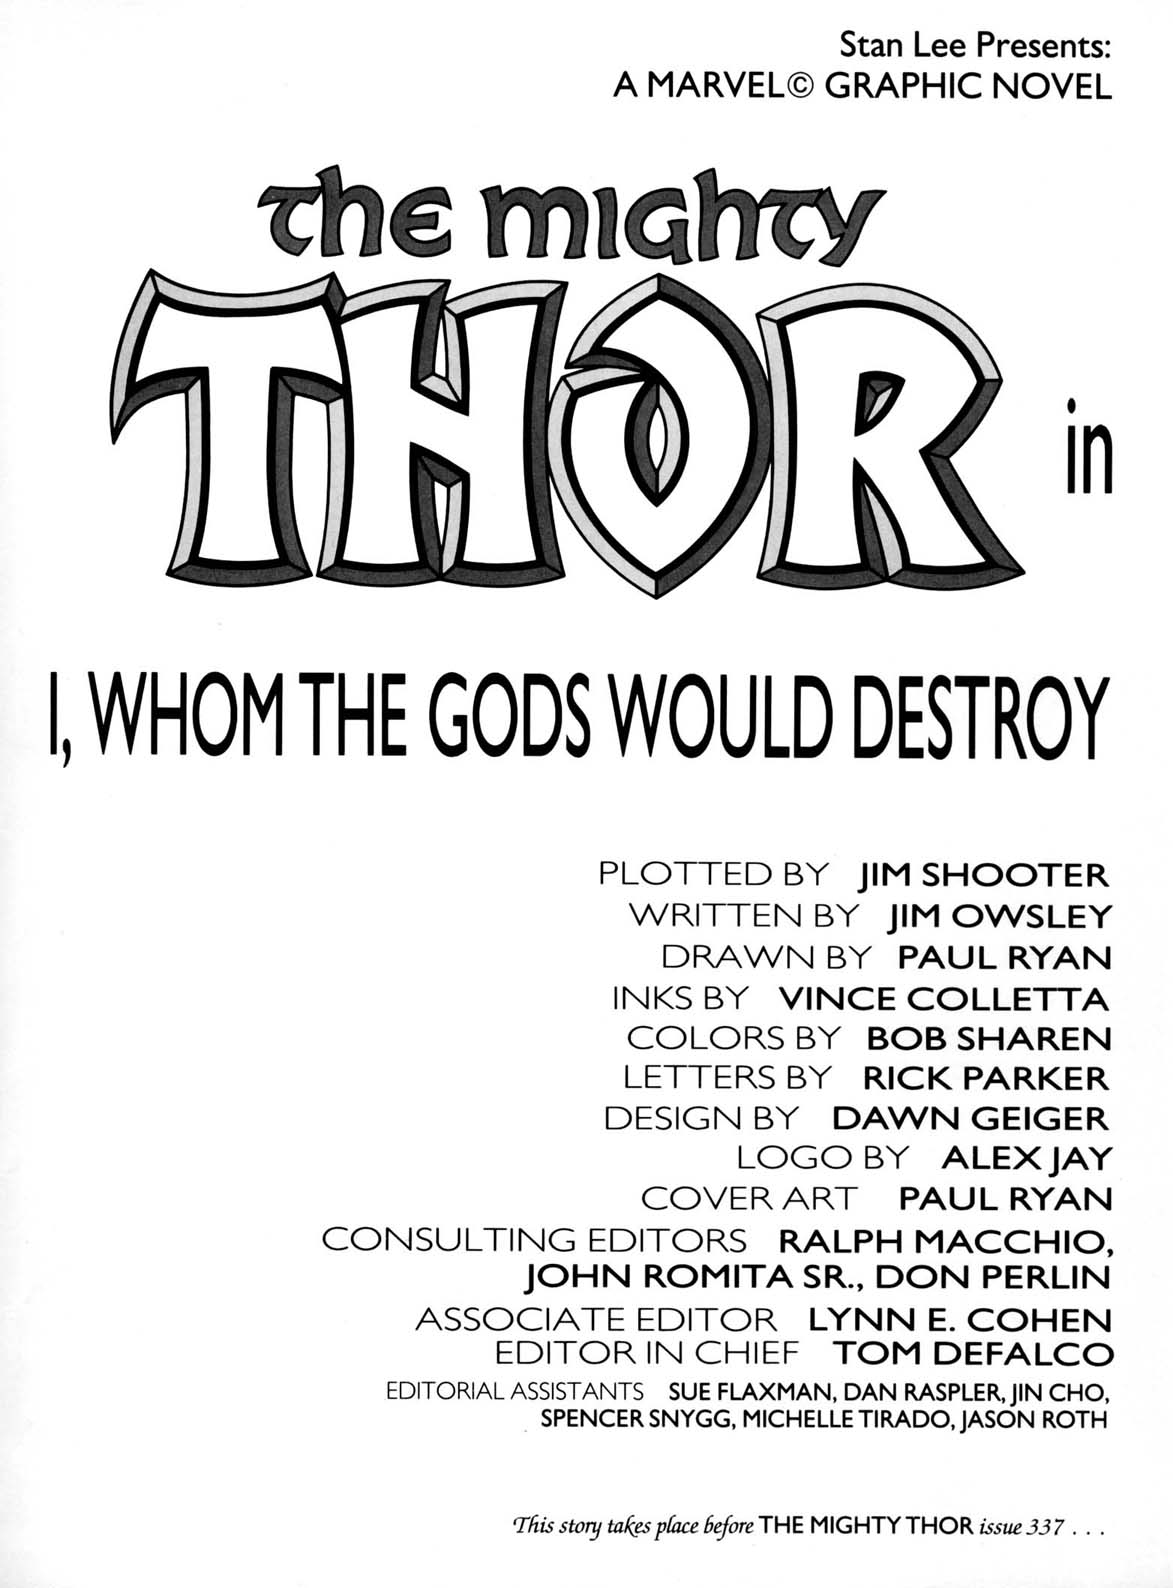 Read online Marvel Graphic Novel comic -  Issue #32 - Thor - Whom the Gods Would Destroy - 2